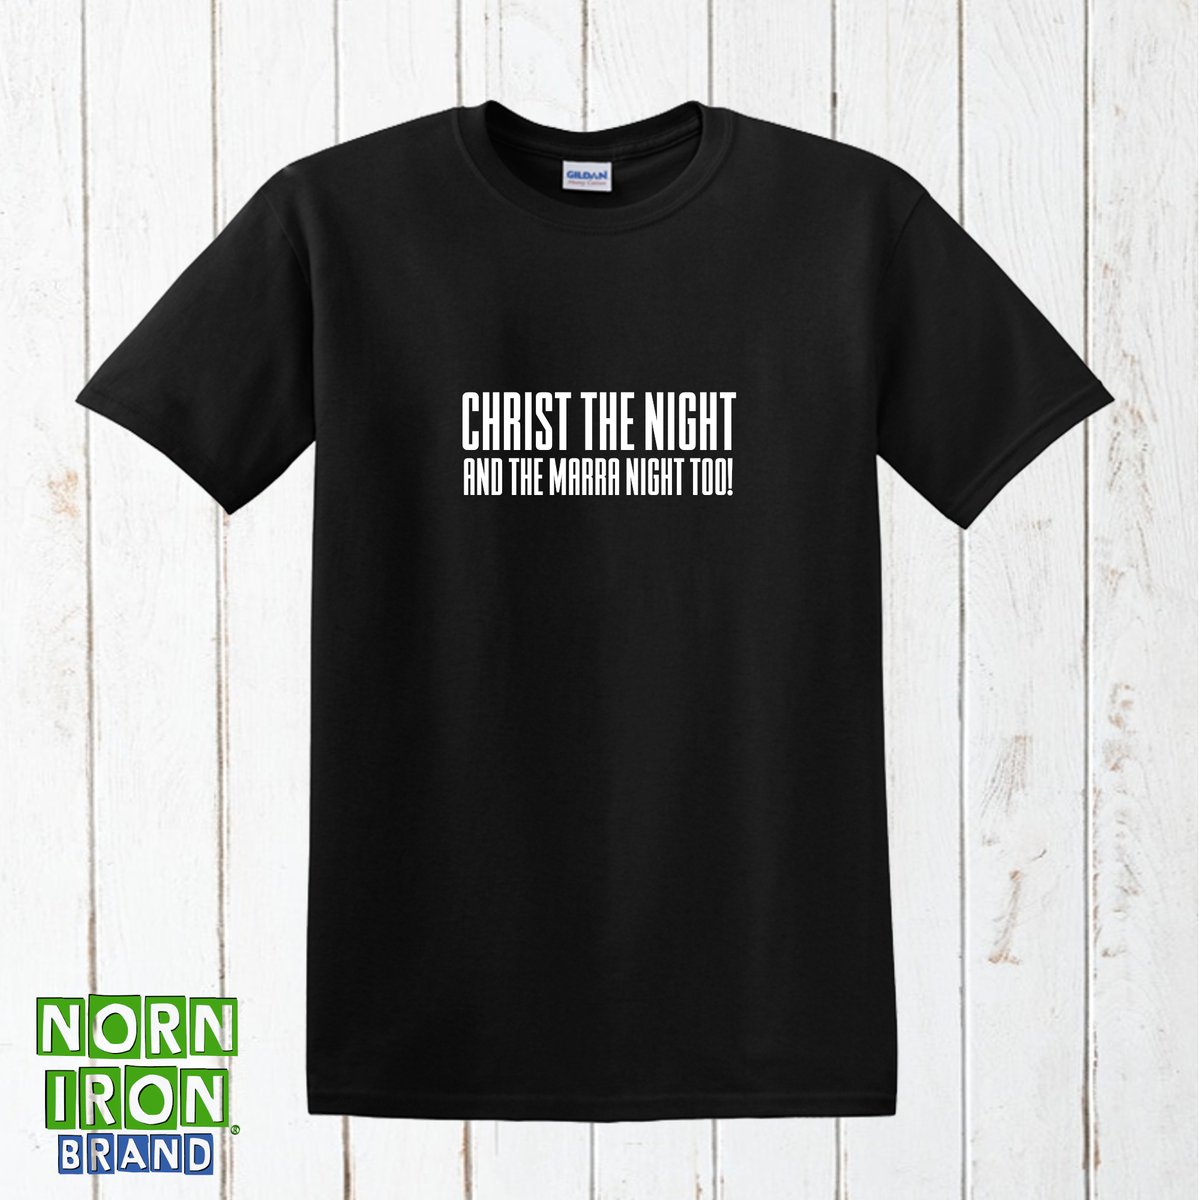 Christ The Night (and the marra night too!) T-Shirt